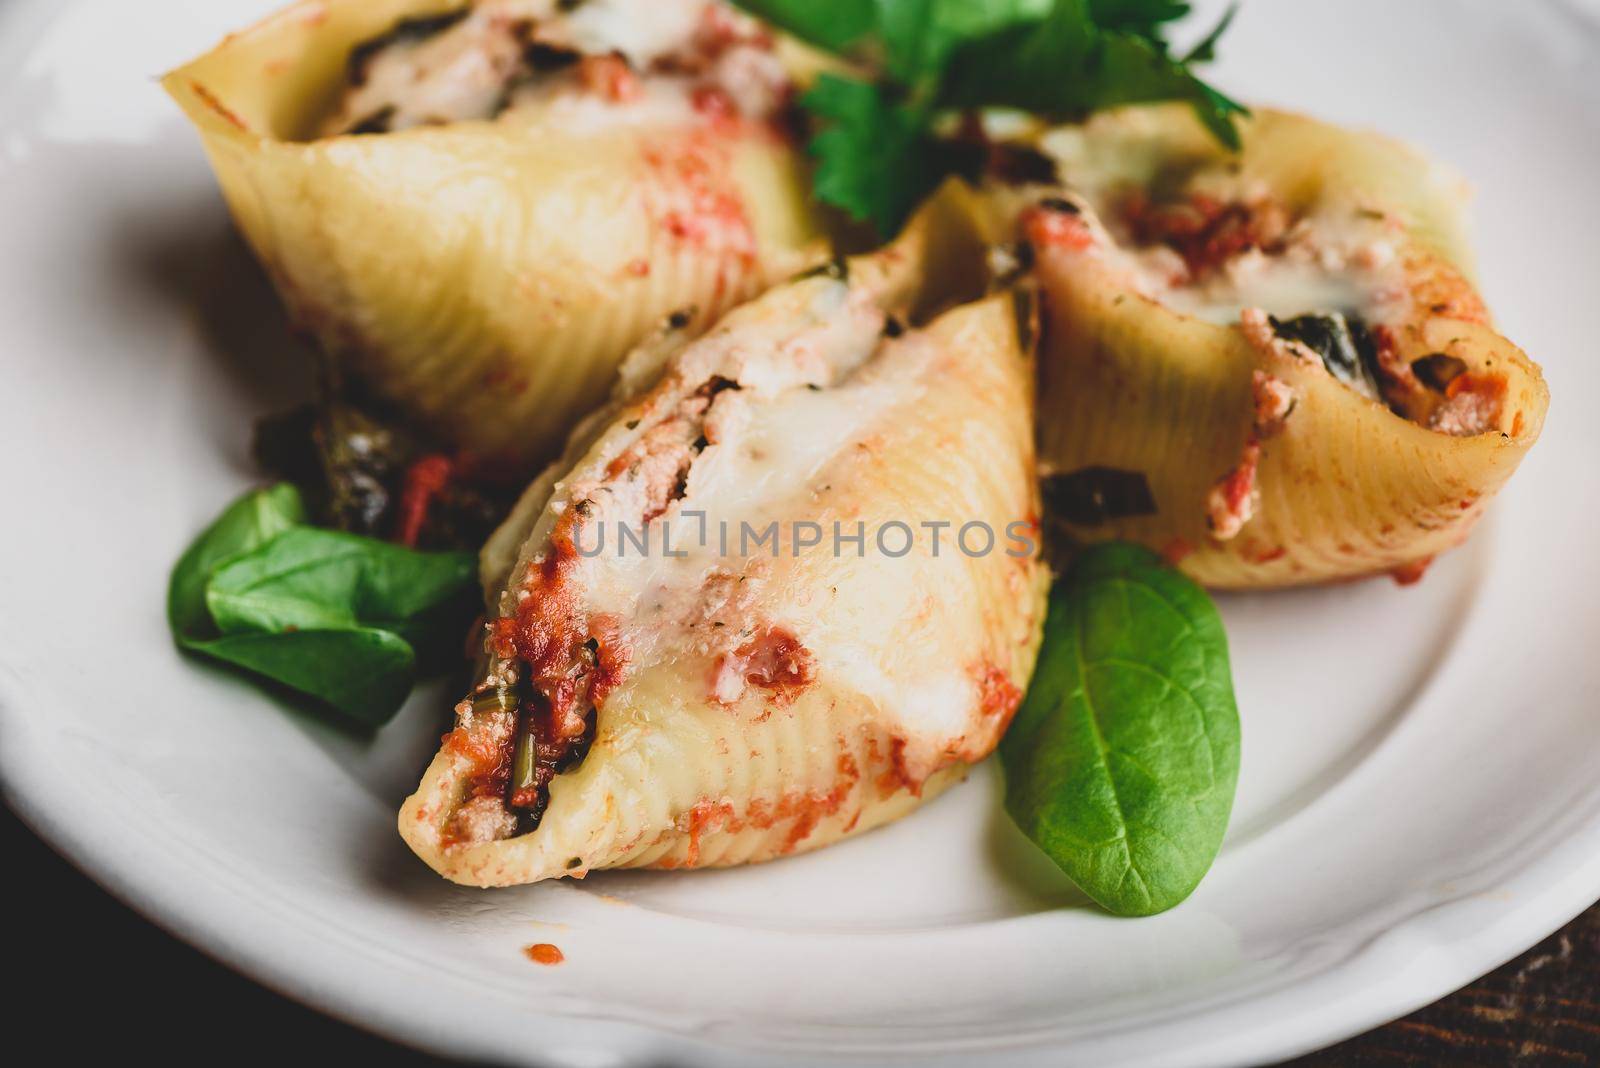 Stuffed pasta with ground beef, spinach and cheese by Seva_blsv